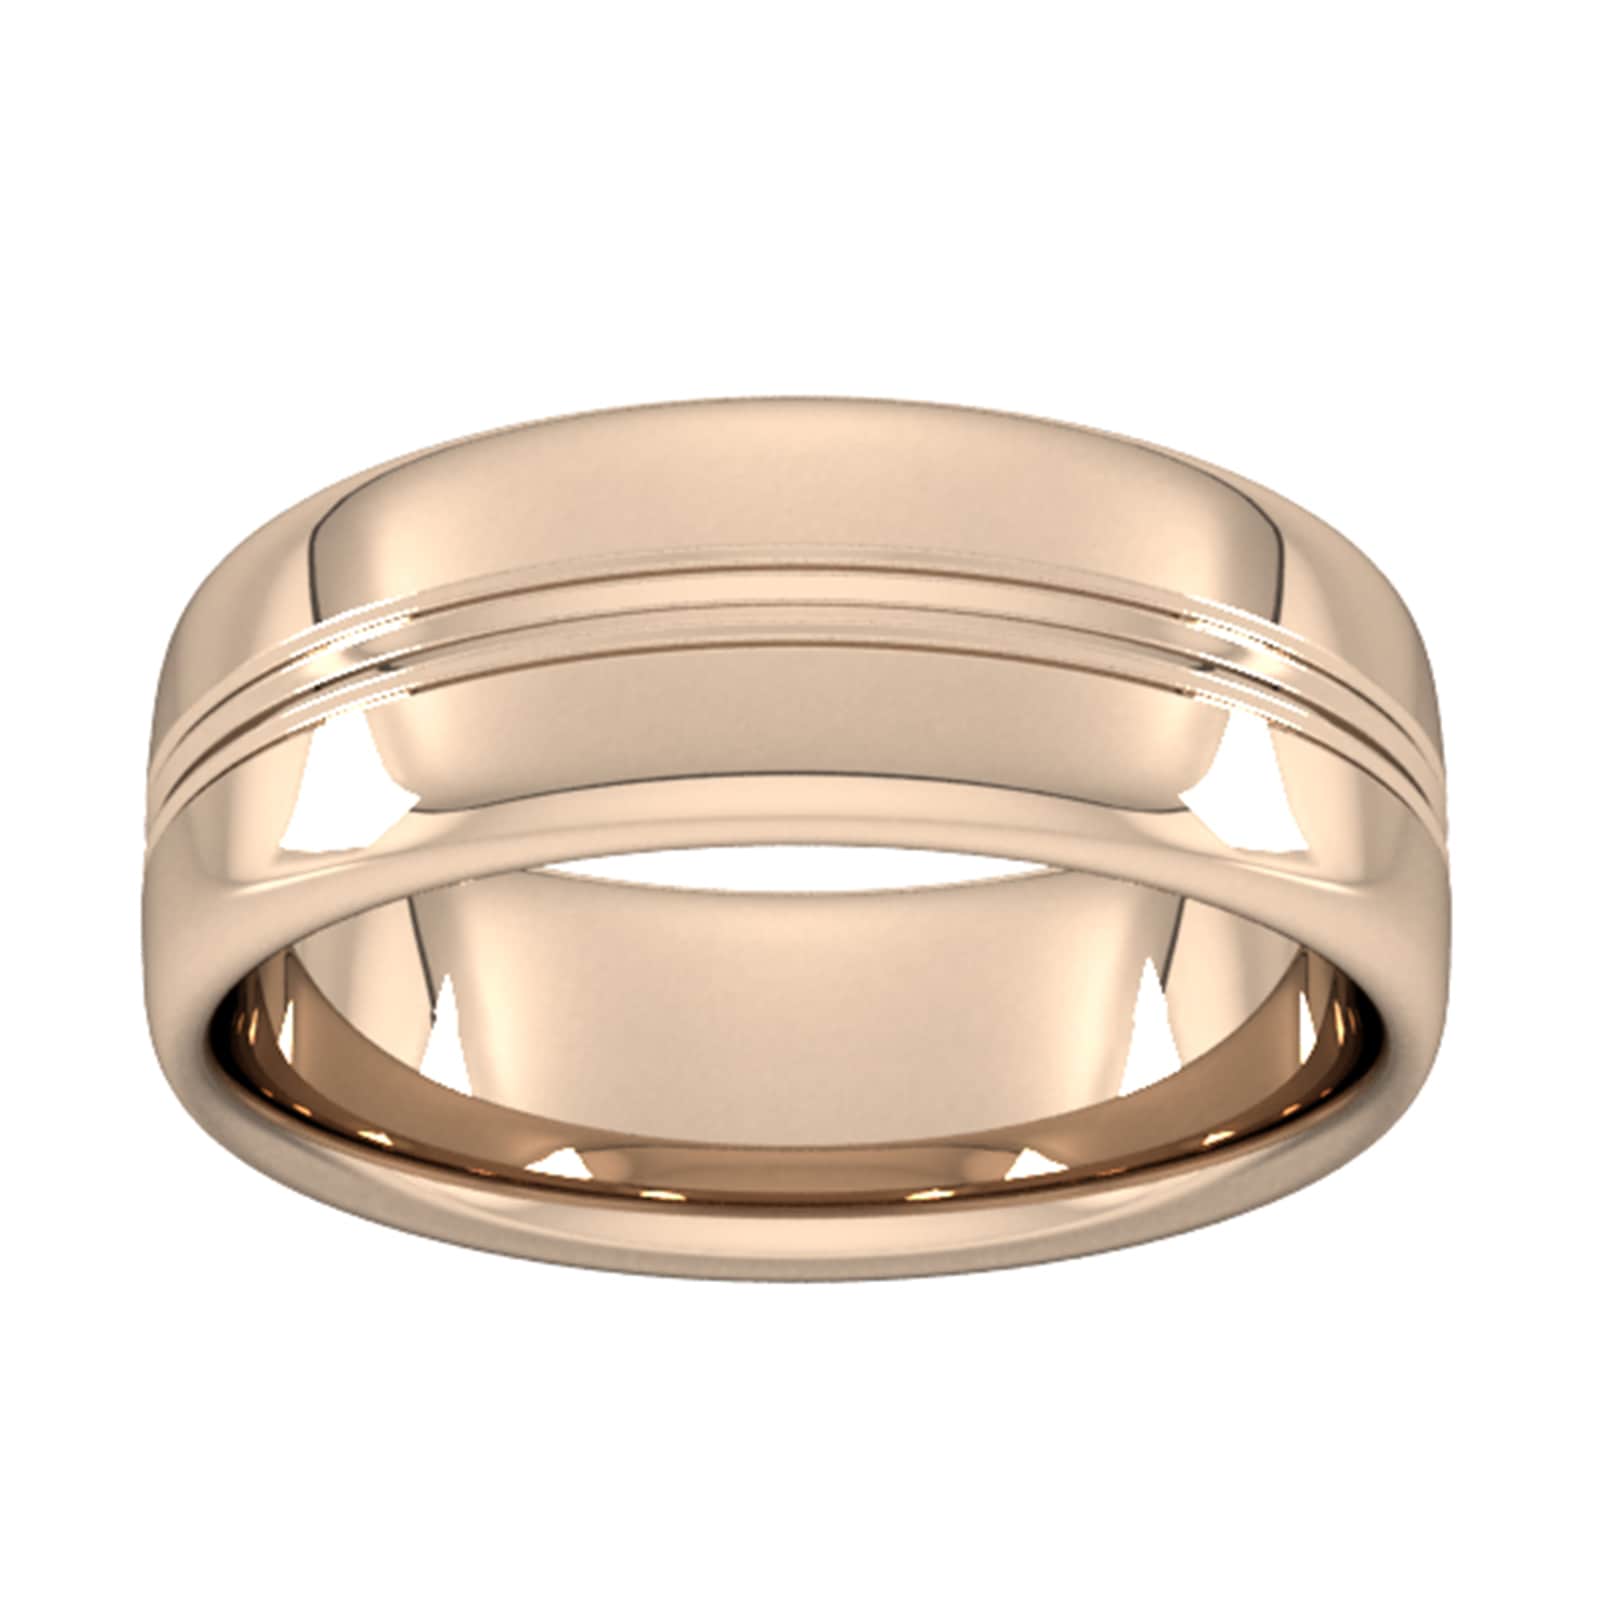 8mm Slight Court Heavy Grooved Polished Finish Wedding Ring In 18 Carat Rose Gold - Ring Size N